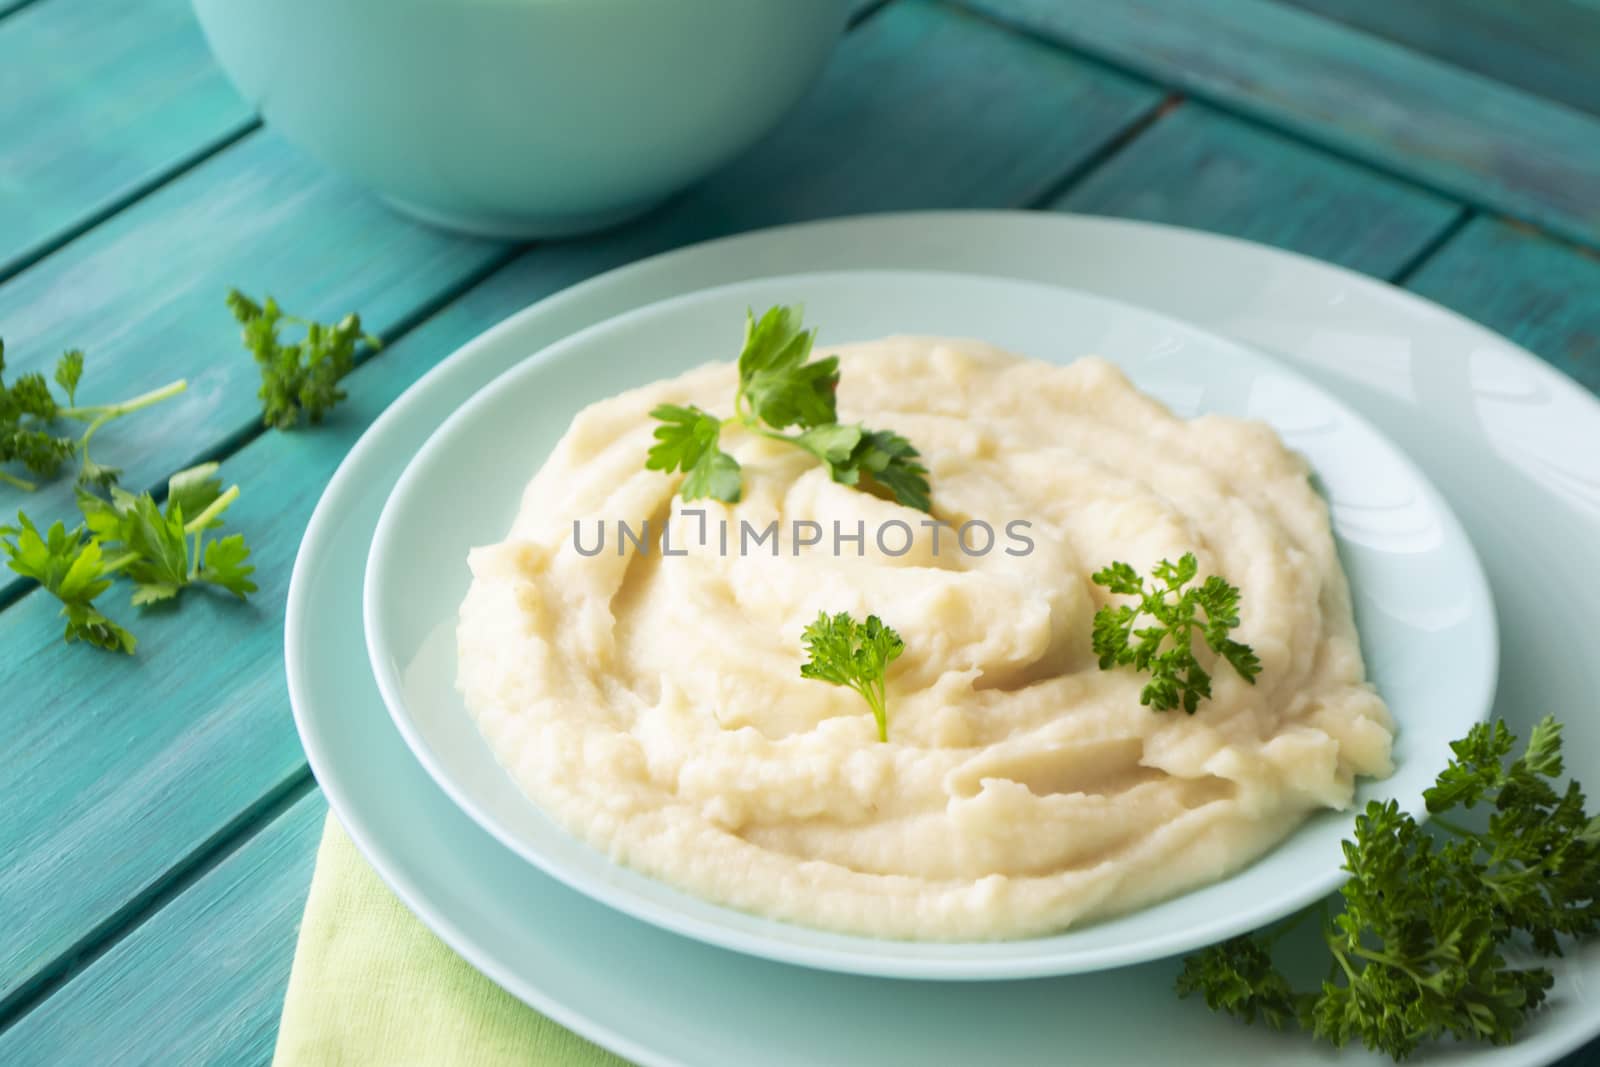 Mashed pureed potato in bowl on wooden table with persil